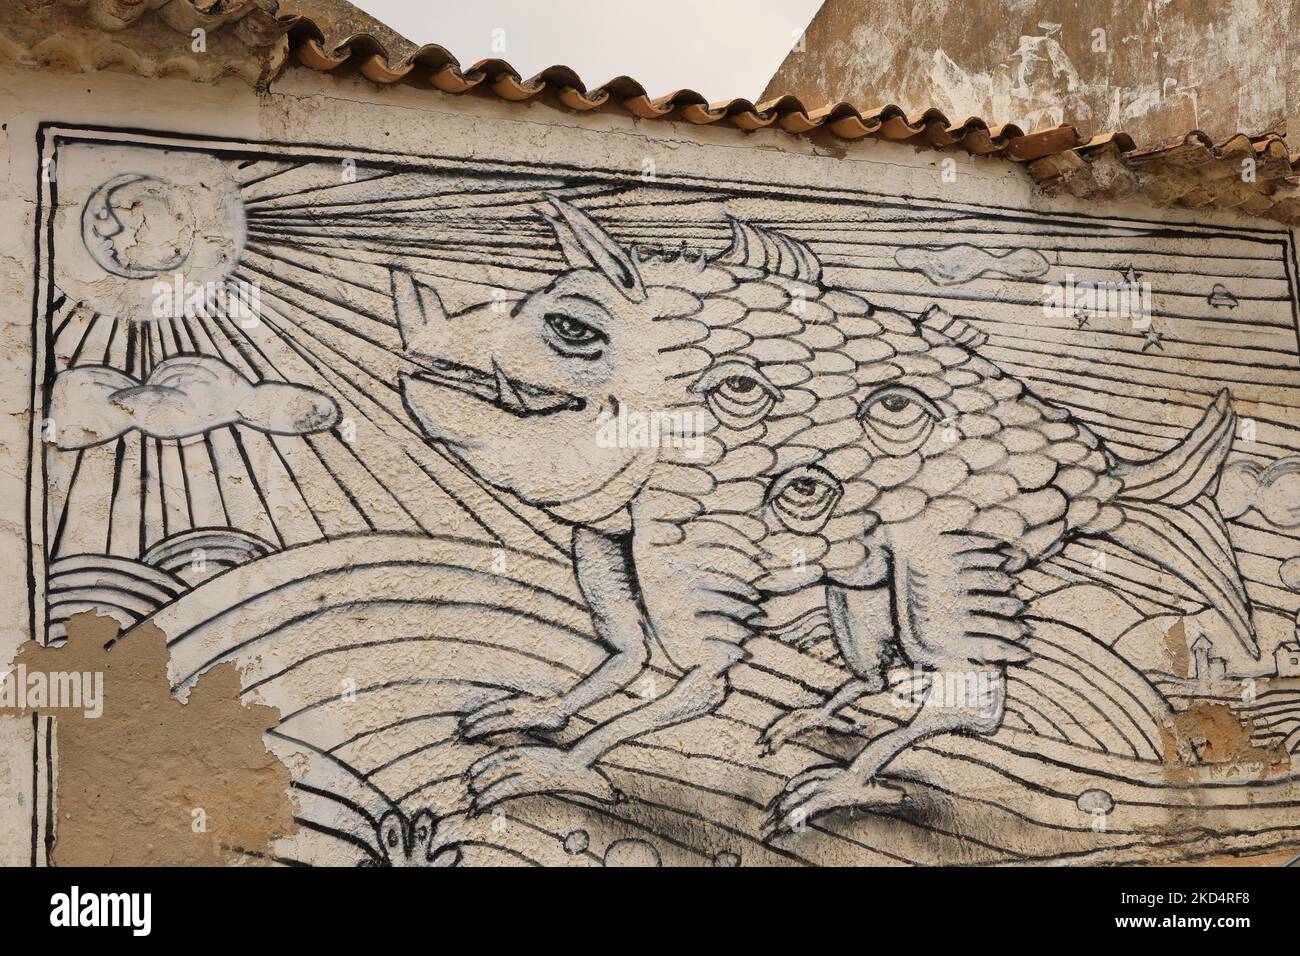 Street Art. A mural of an imaginary creature on an old building in old town Lagos, Algarve, Portugal Stock Photo